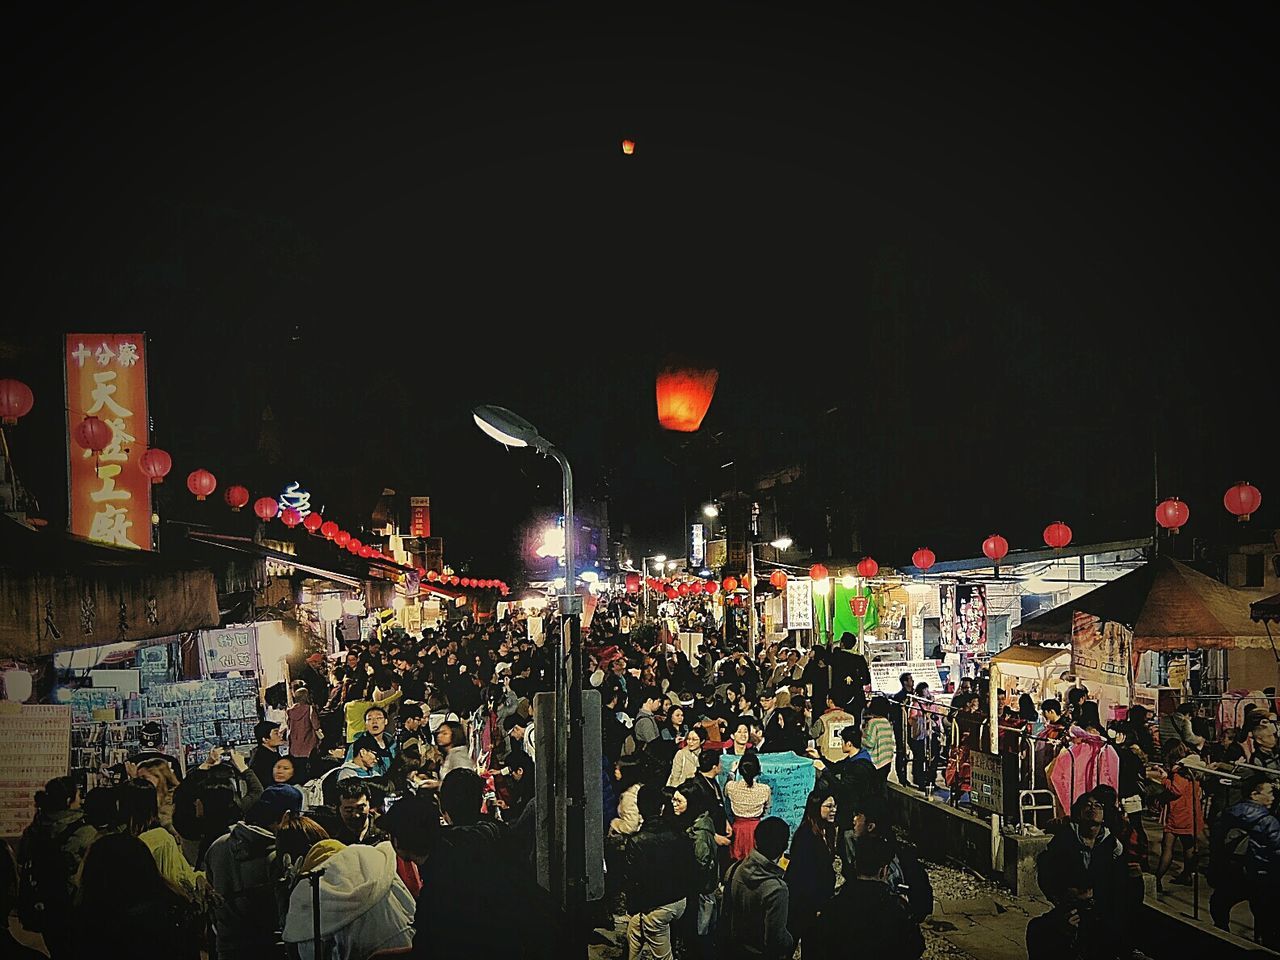 People at night market against sky